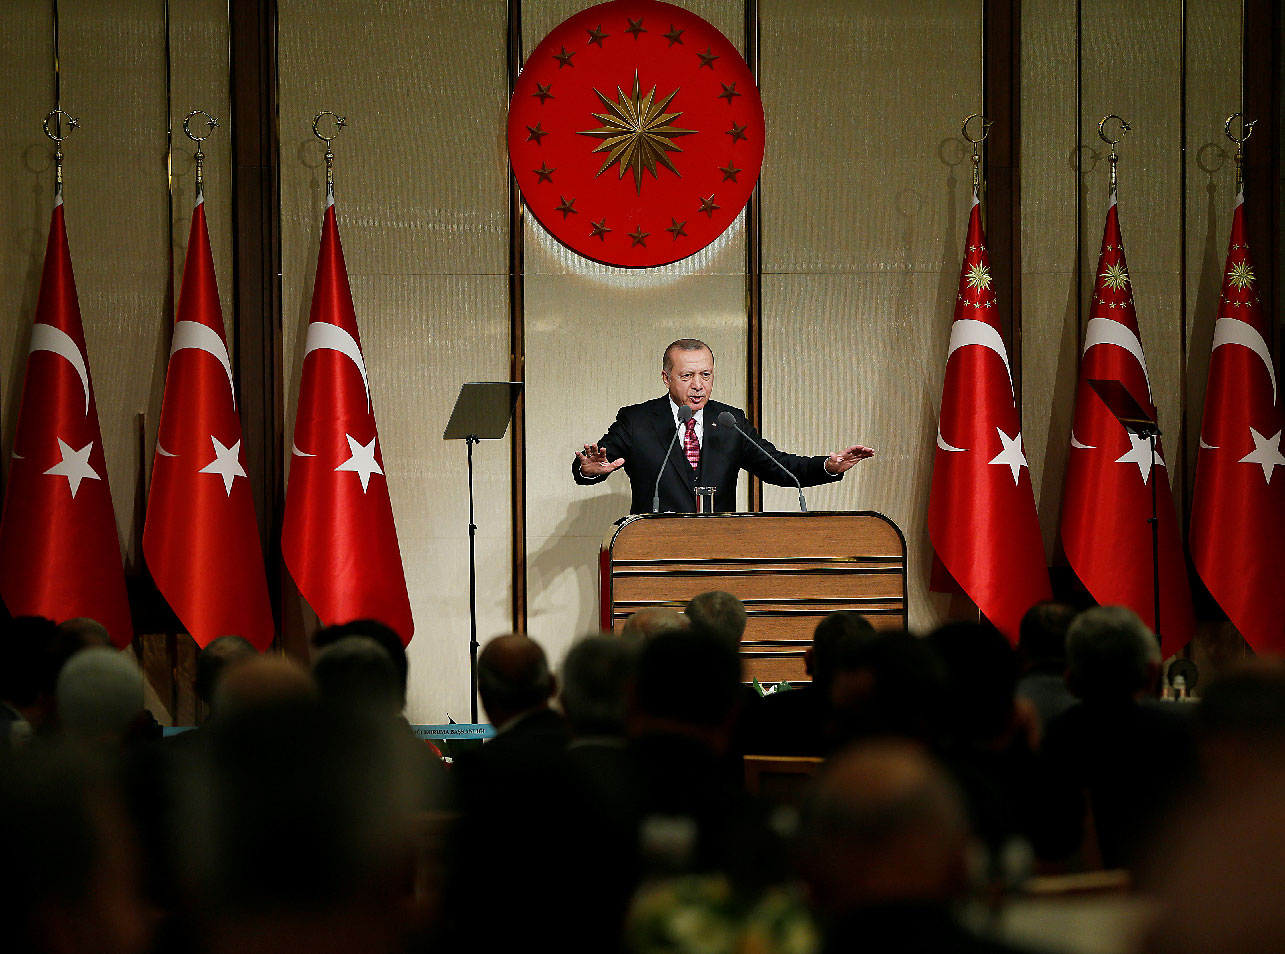 Turkish President Tayyip Erdogan makes a speech during his meeting with mukhtars at the Presidential Palace in Ankara, Turkey, November 21, 2018.